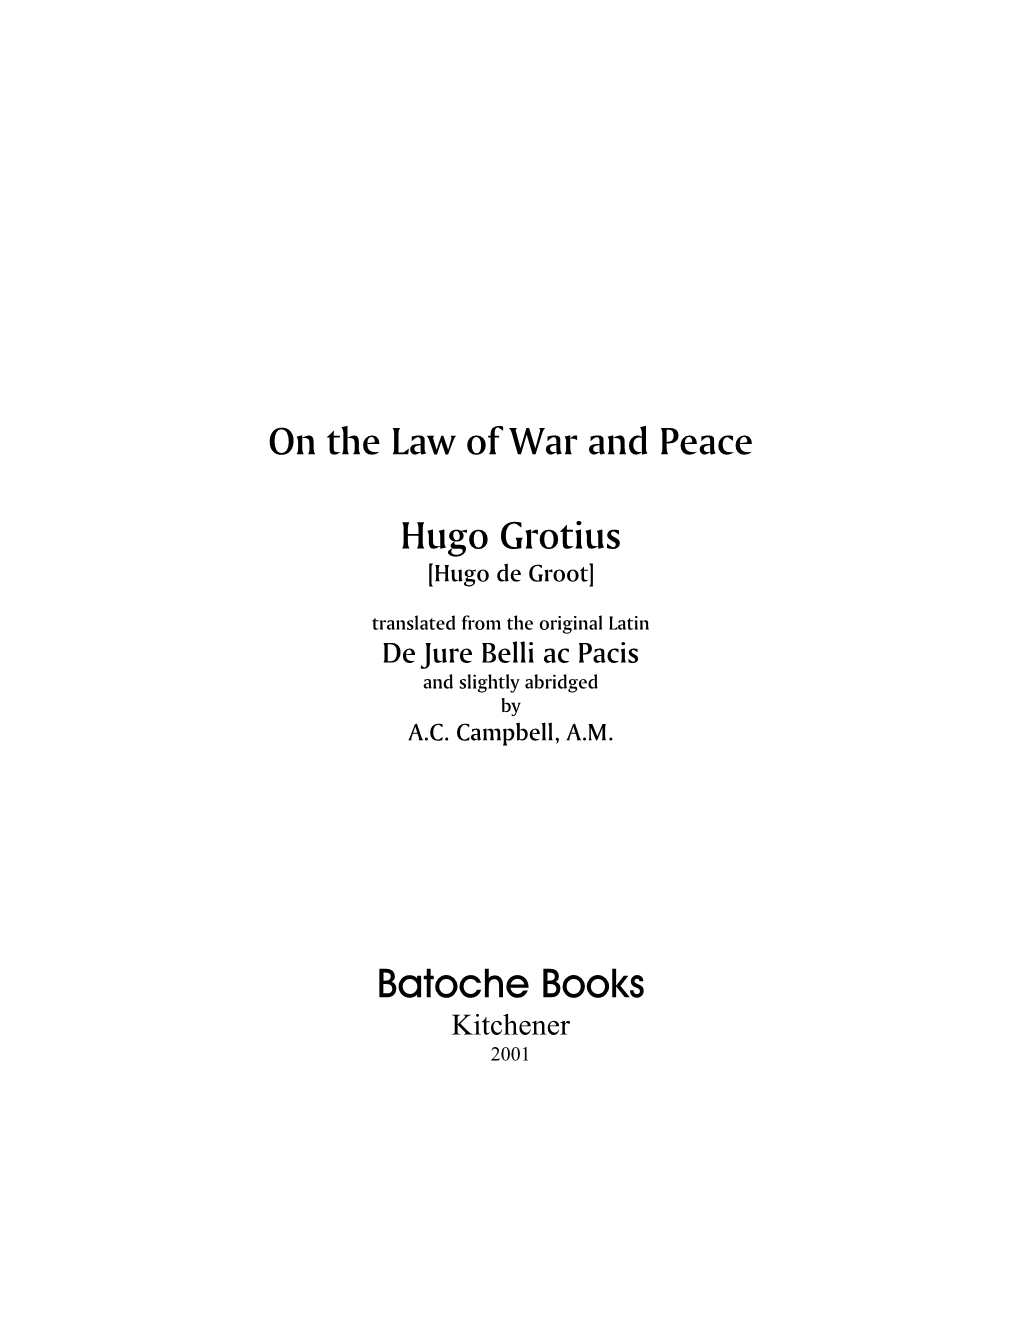 Hugo Grotius, on the Law of War and Peace, 4